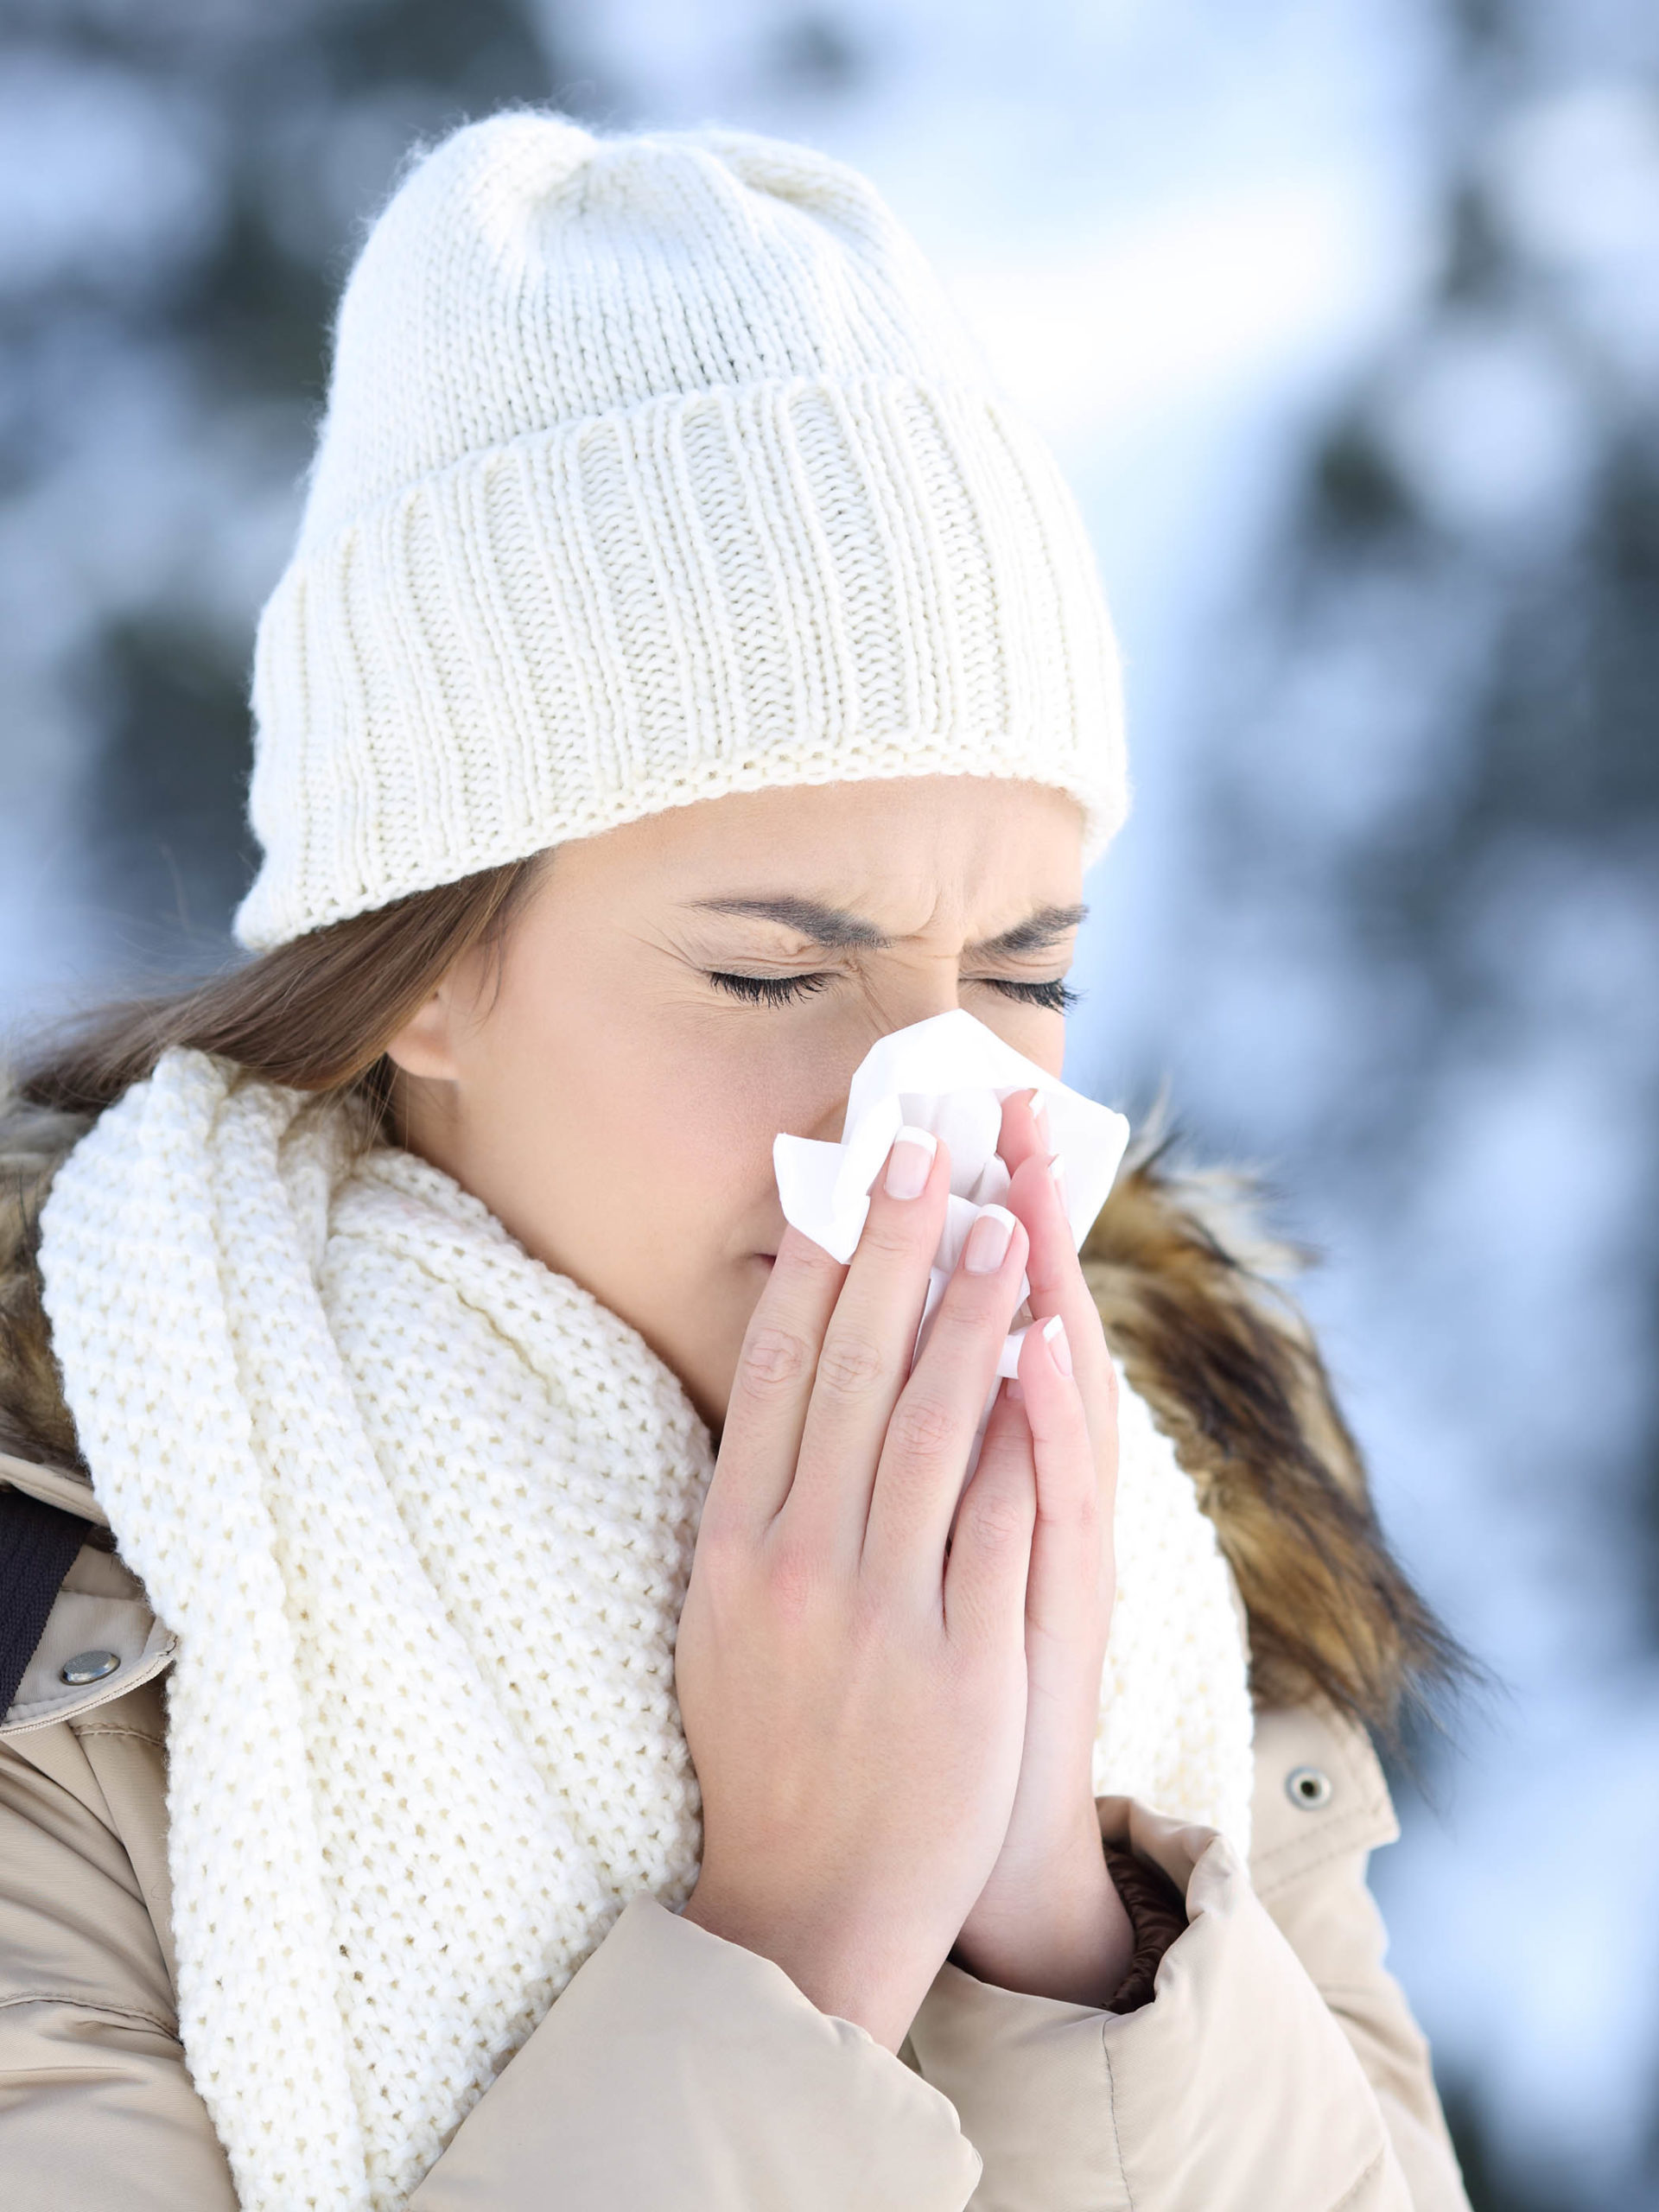 teen girl blowing in a tissue in cold winter clothes